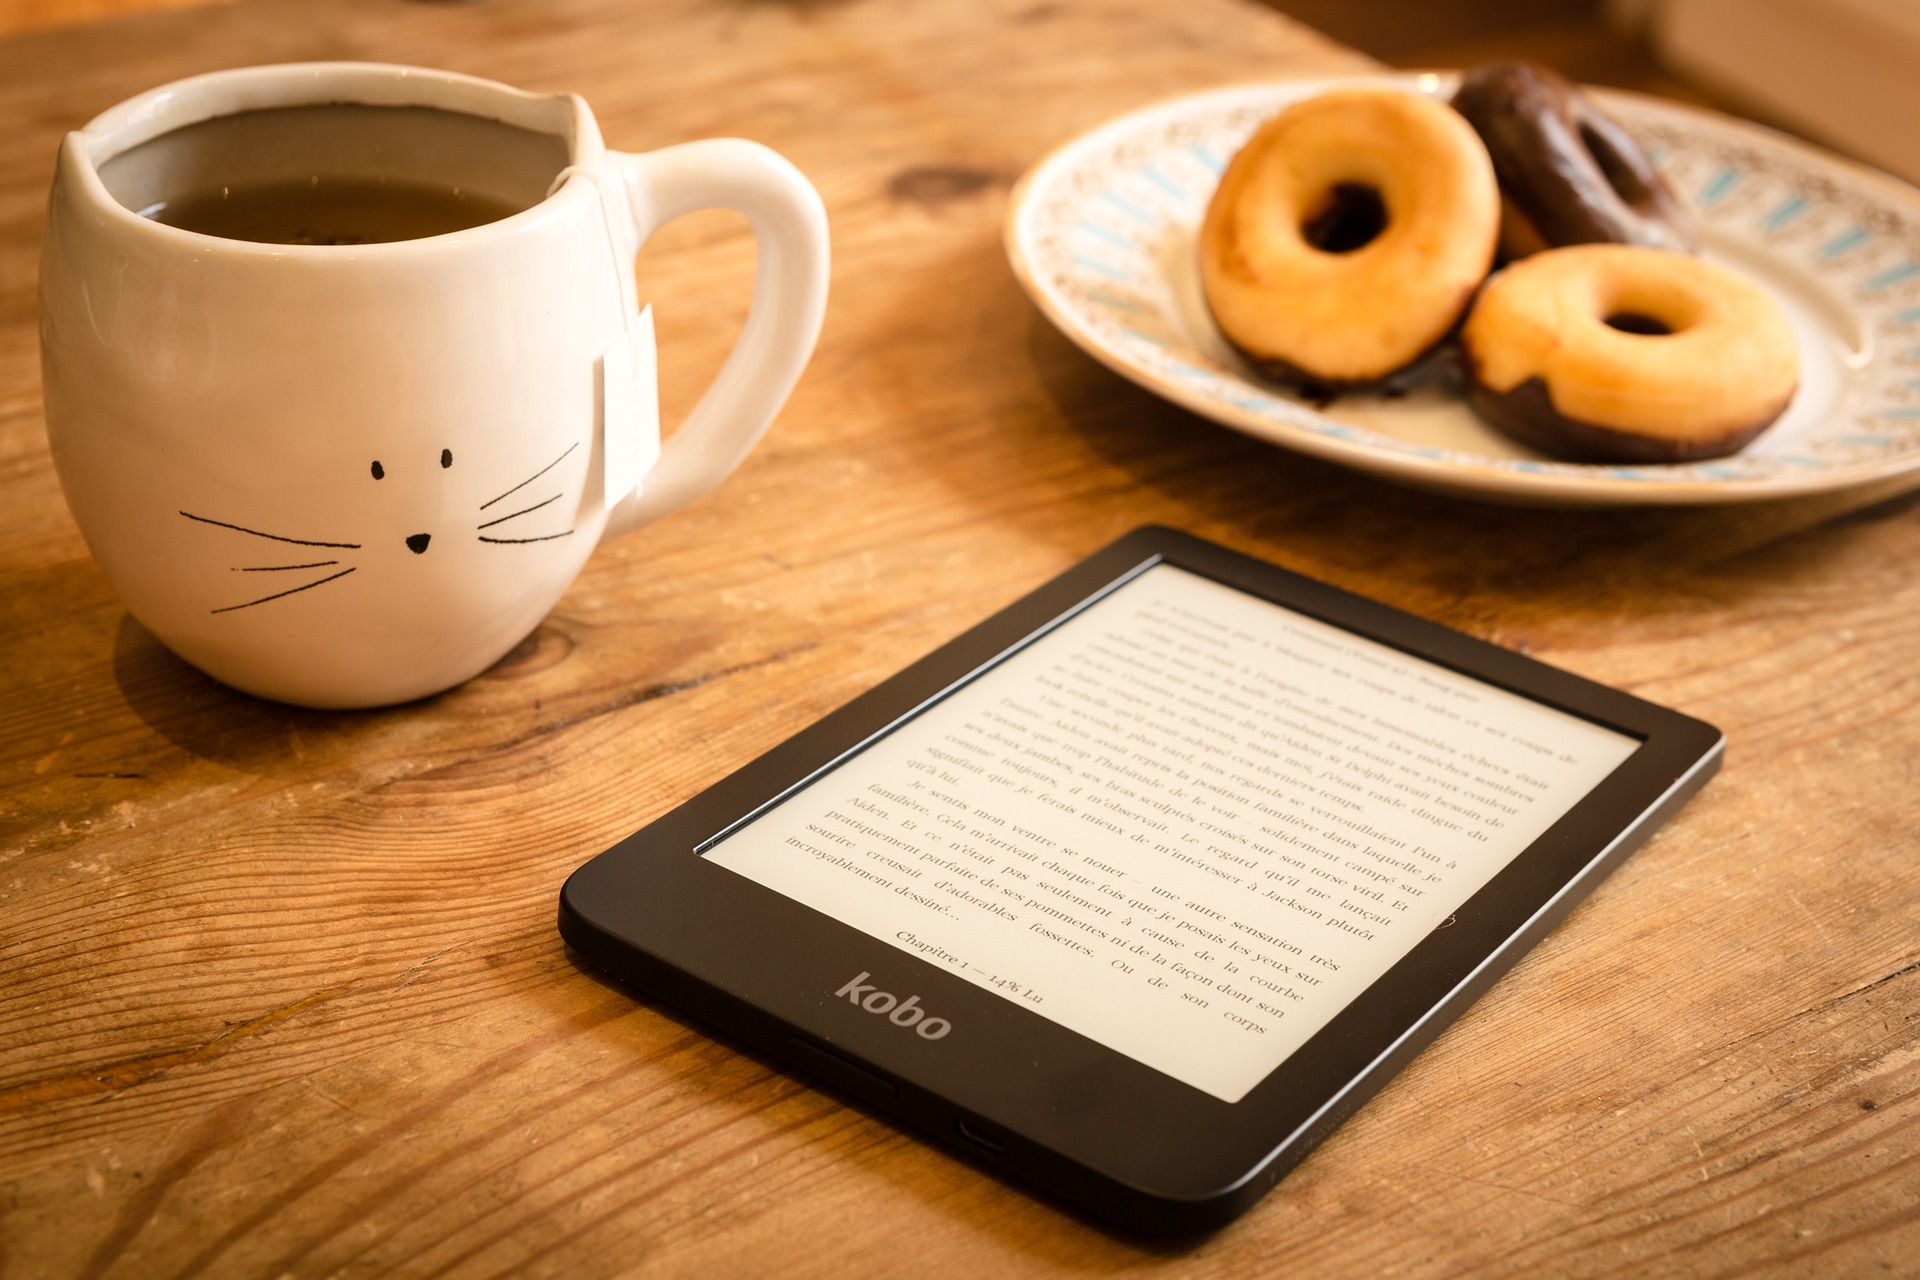 Pictured are an e-reader, cup of tea, and plate of doughnuts on a table. 